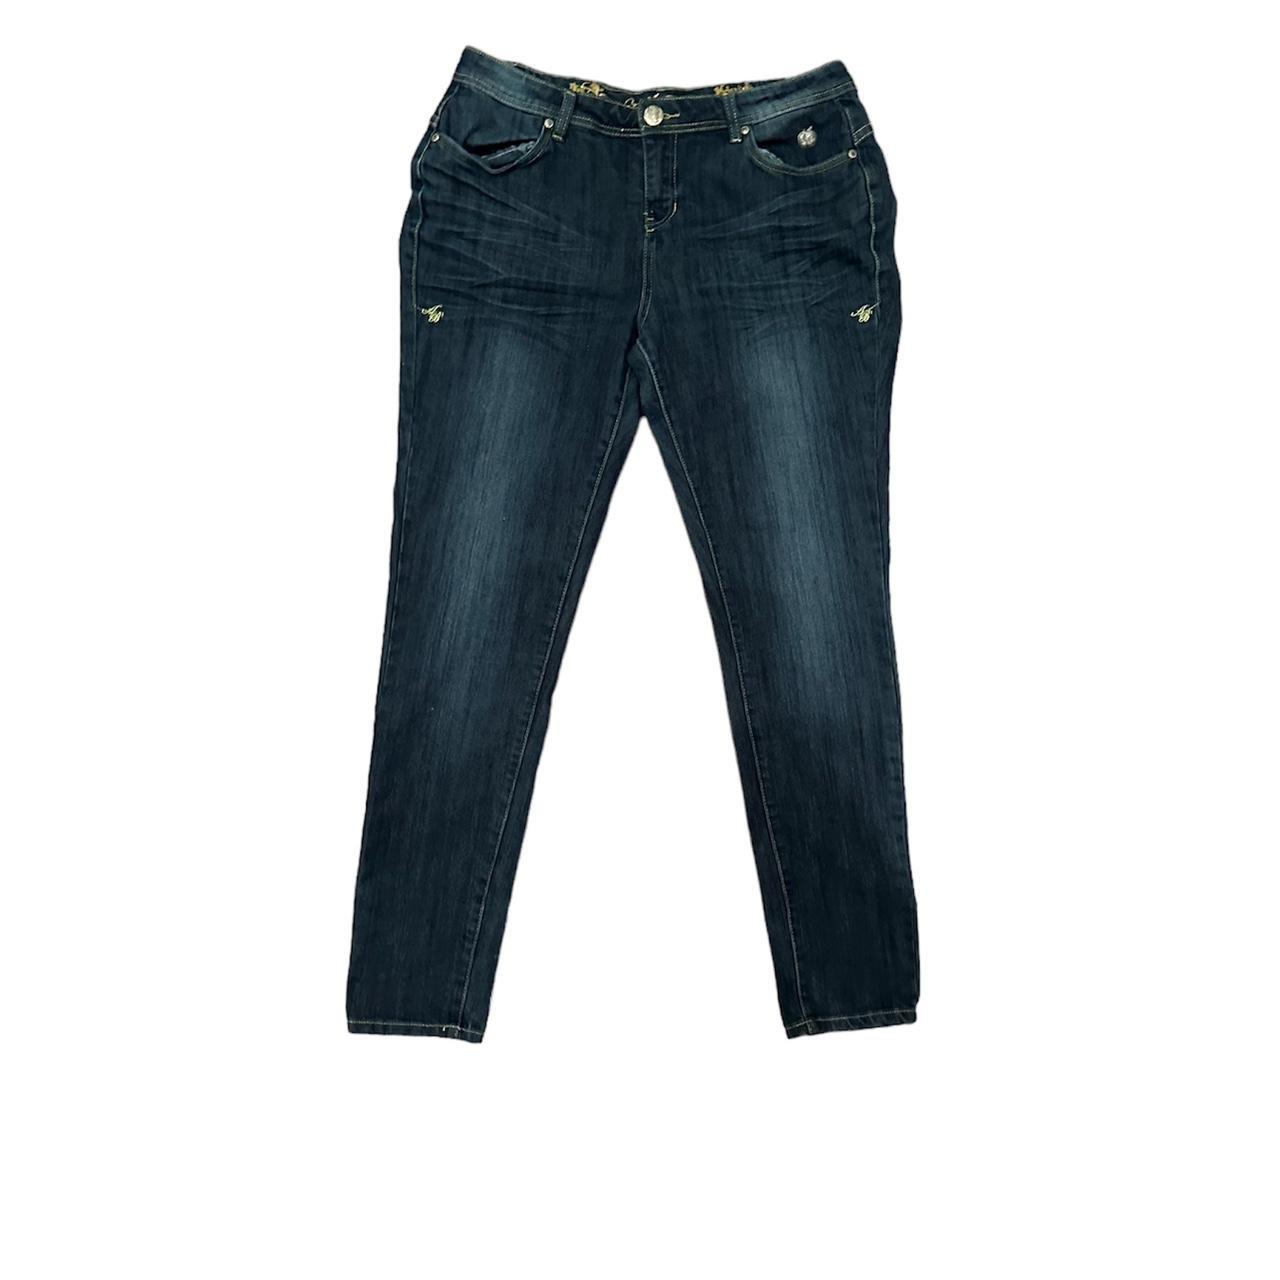 Apple Bottoms Women's Navy and Blue Jeans (2)